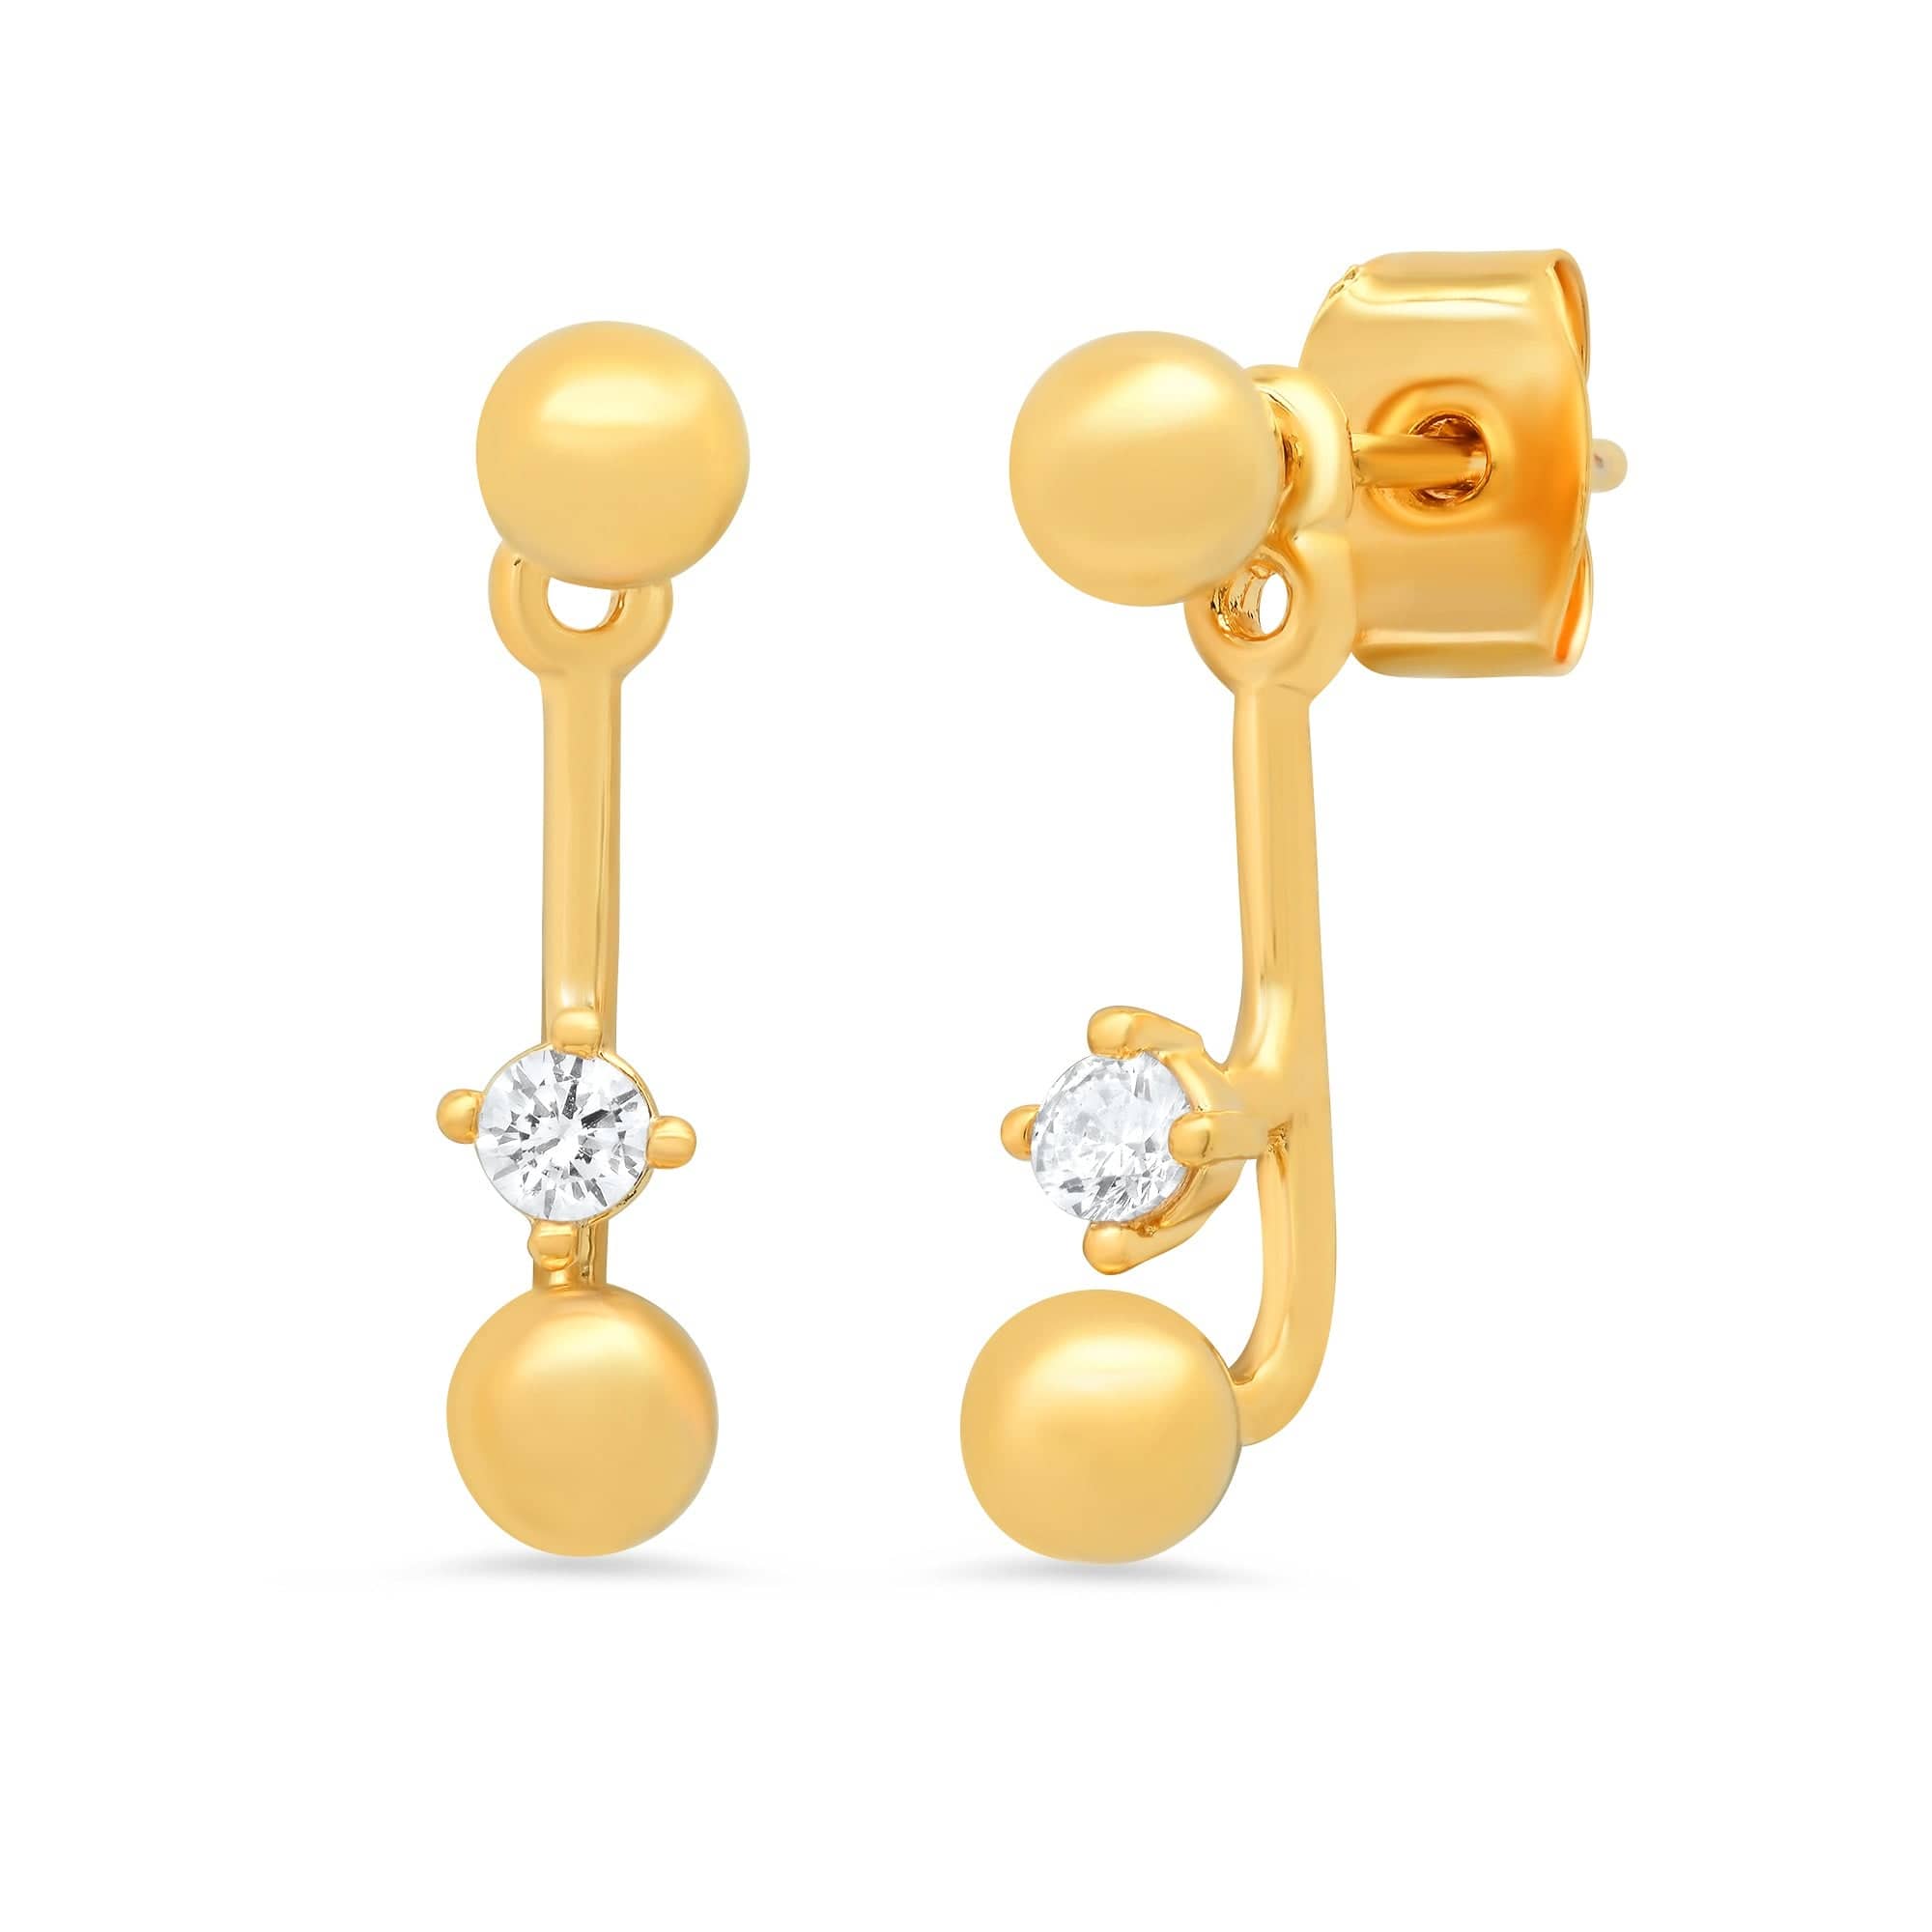 TAI JEWELRY Earrings Double Gold Ball And Cz Ear Jacket